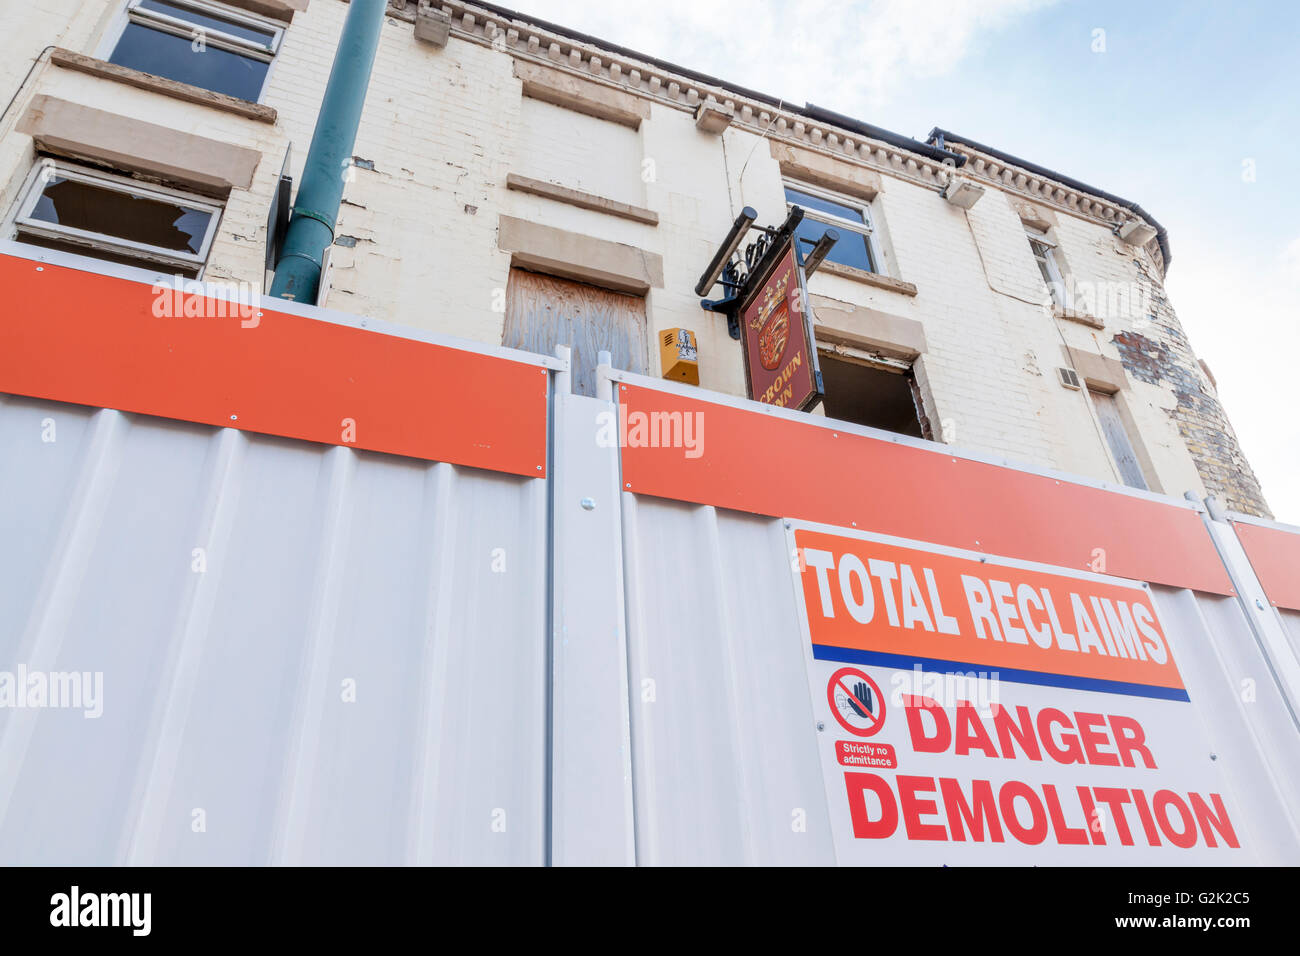 A fenced off pub with demolition sign, Nottingham, England, UK Stock Photo